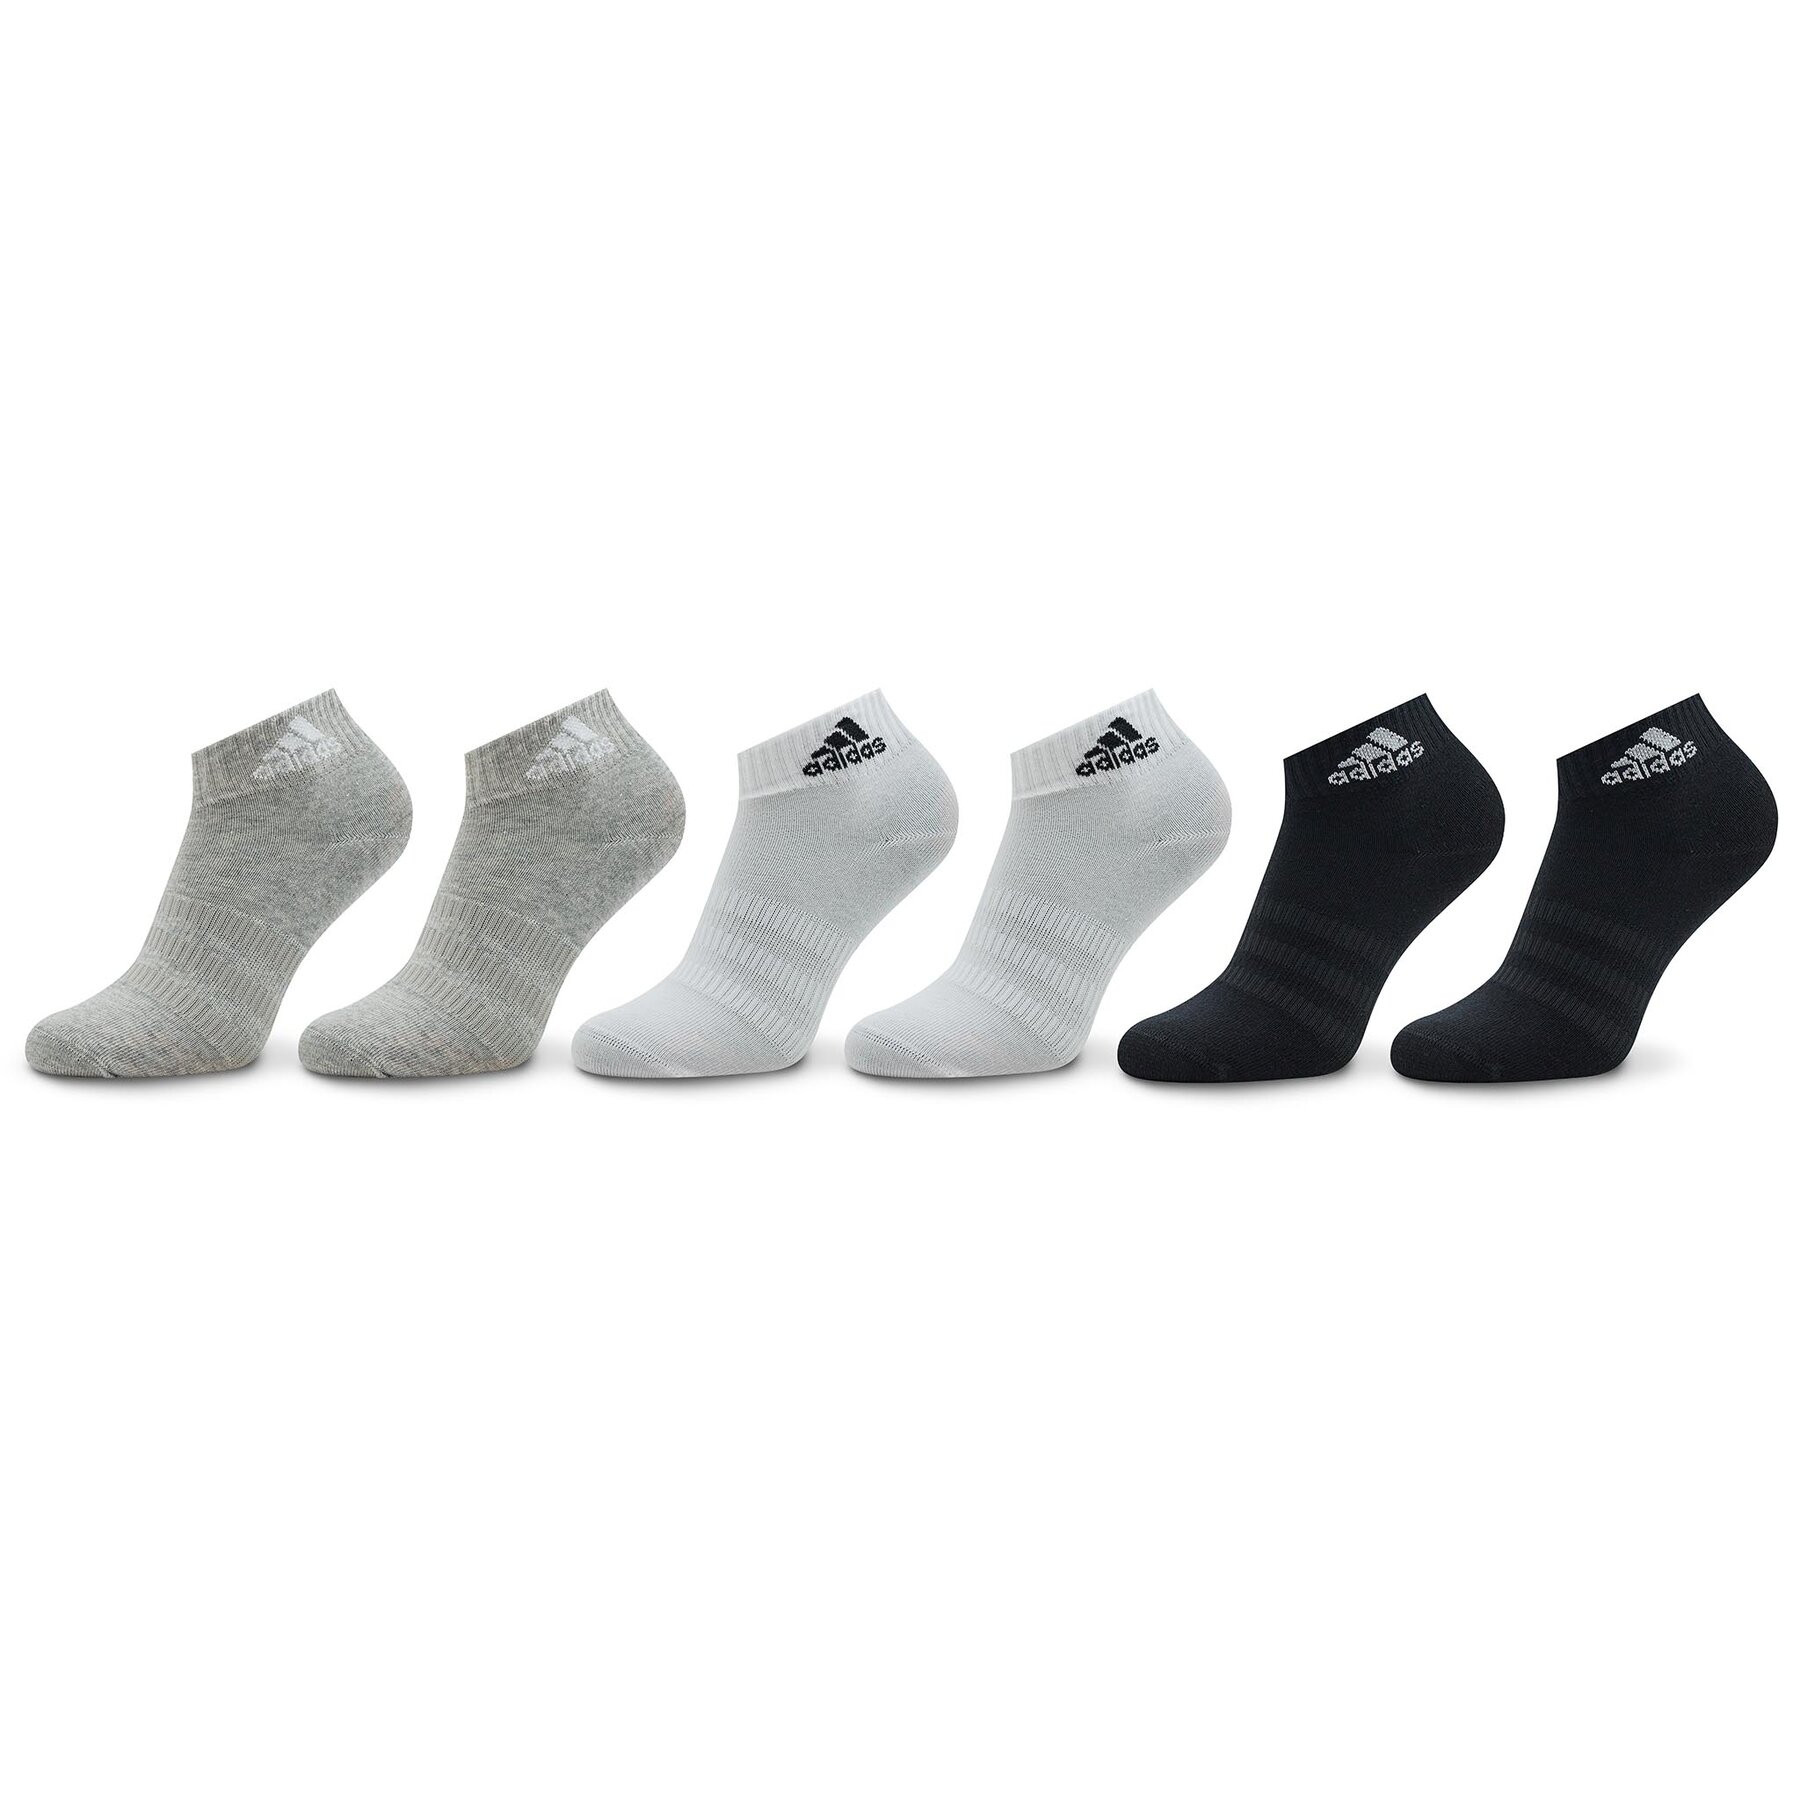 Chaussettes basses unisex adidas Thin and Light Sportswear Ankle Socks 6 Pairs IC1307 Gris